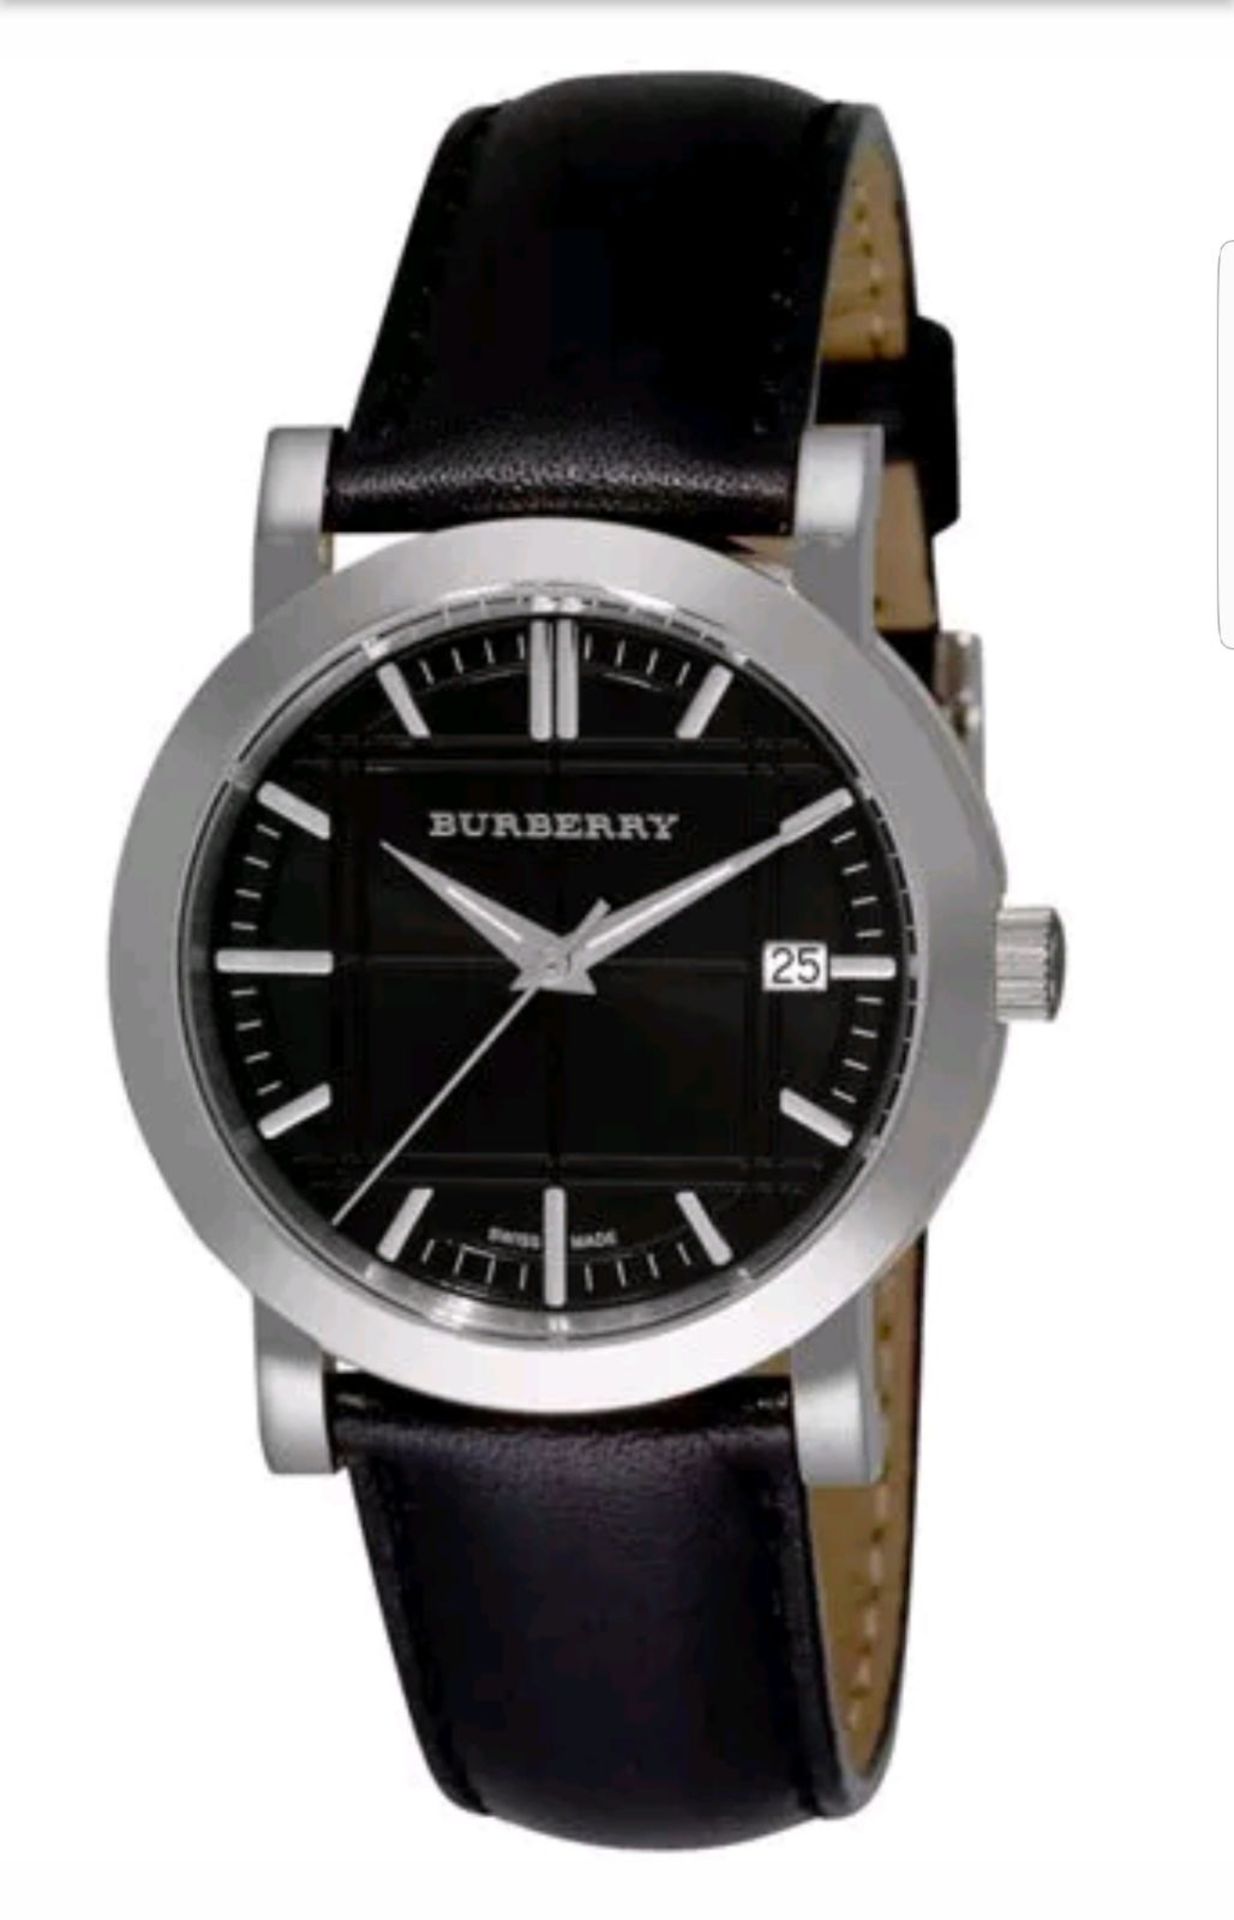 BRAND NEW GENTS BURBERRY WATCH BU1354, COMPLETE WITH ORIGINAL BOX AND MANUAL